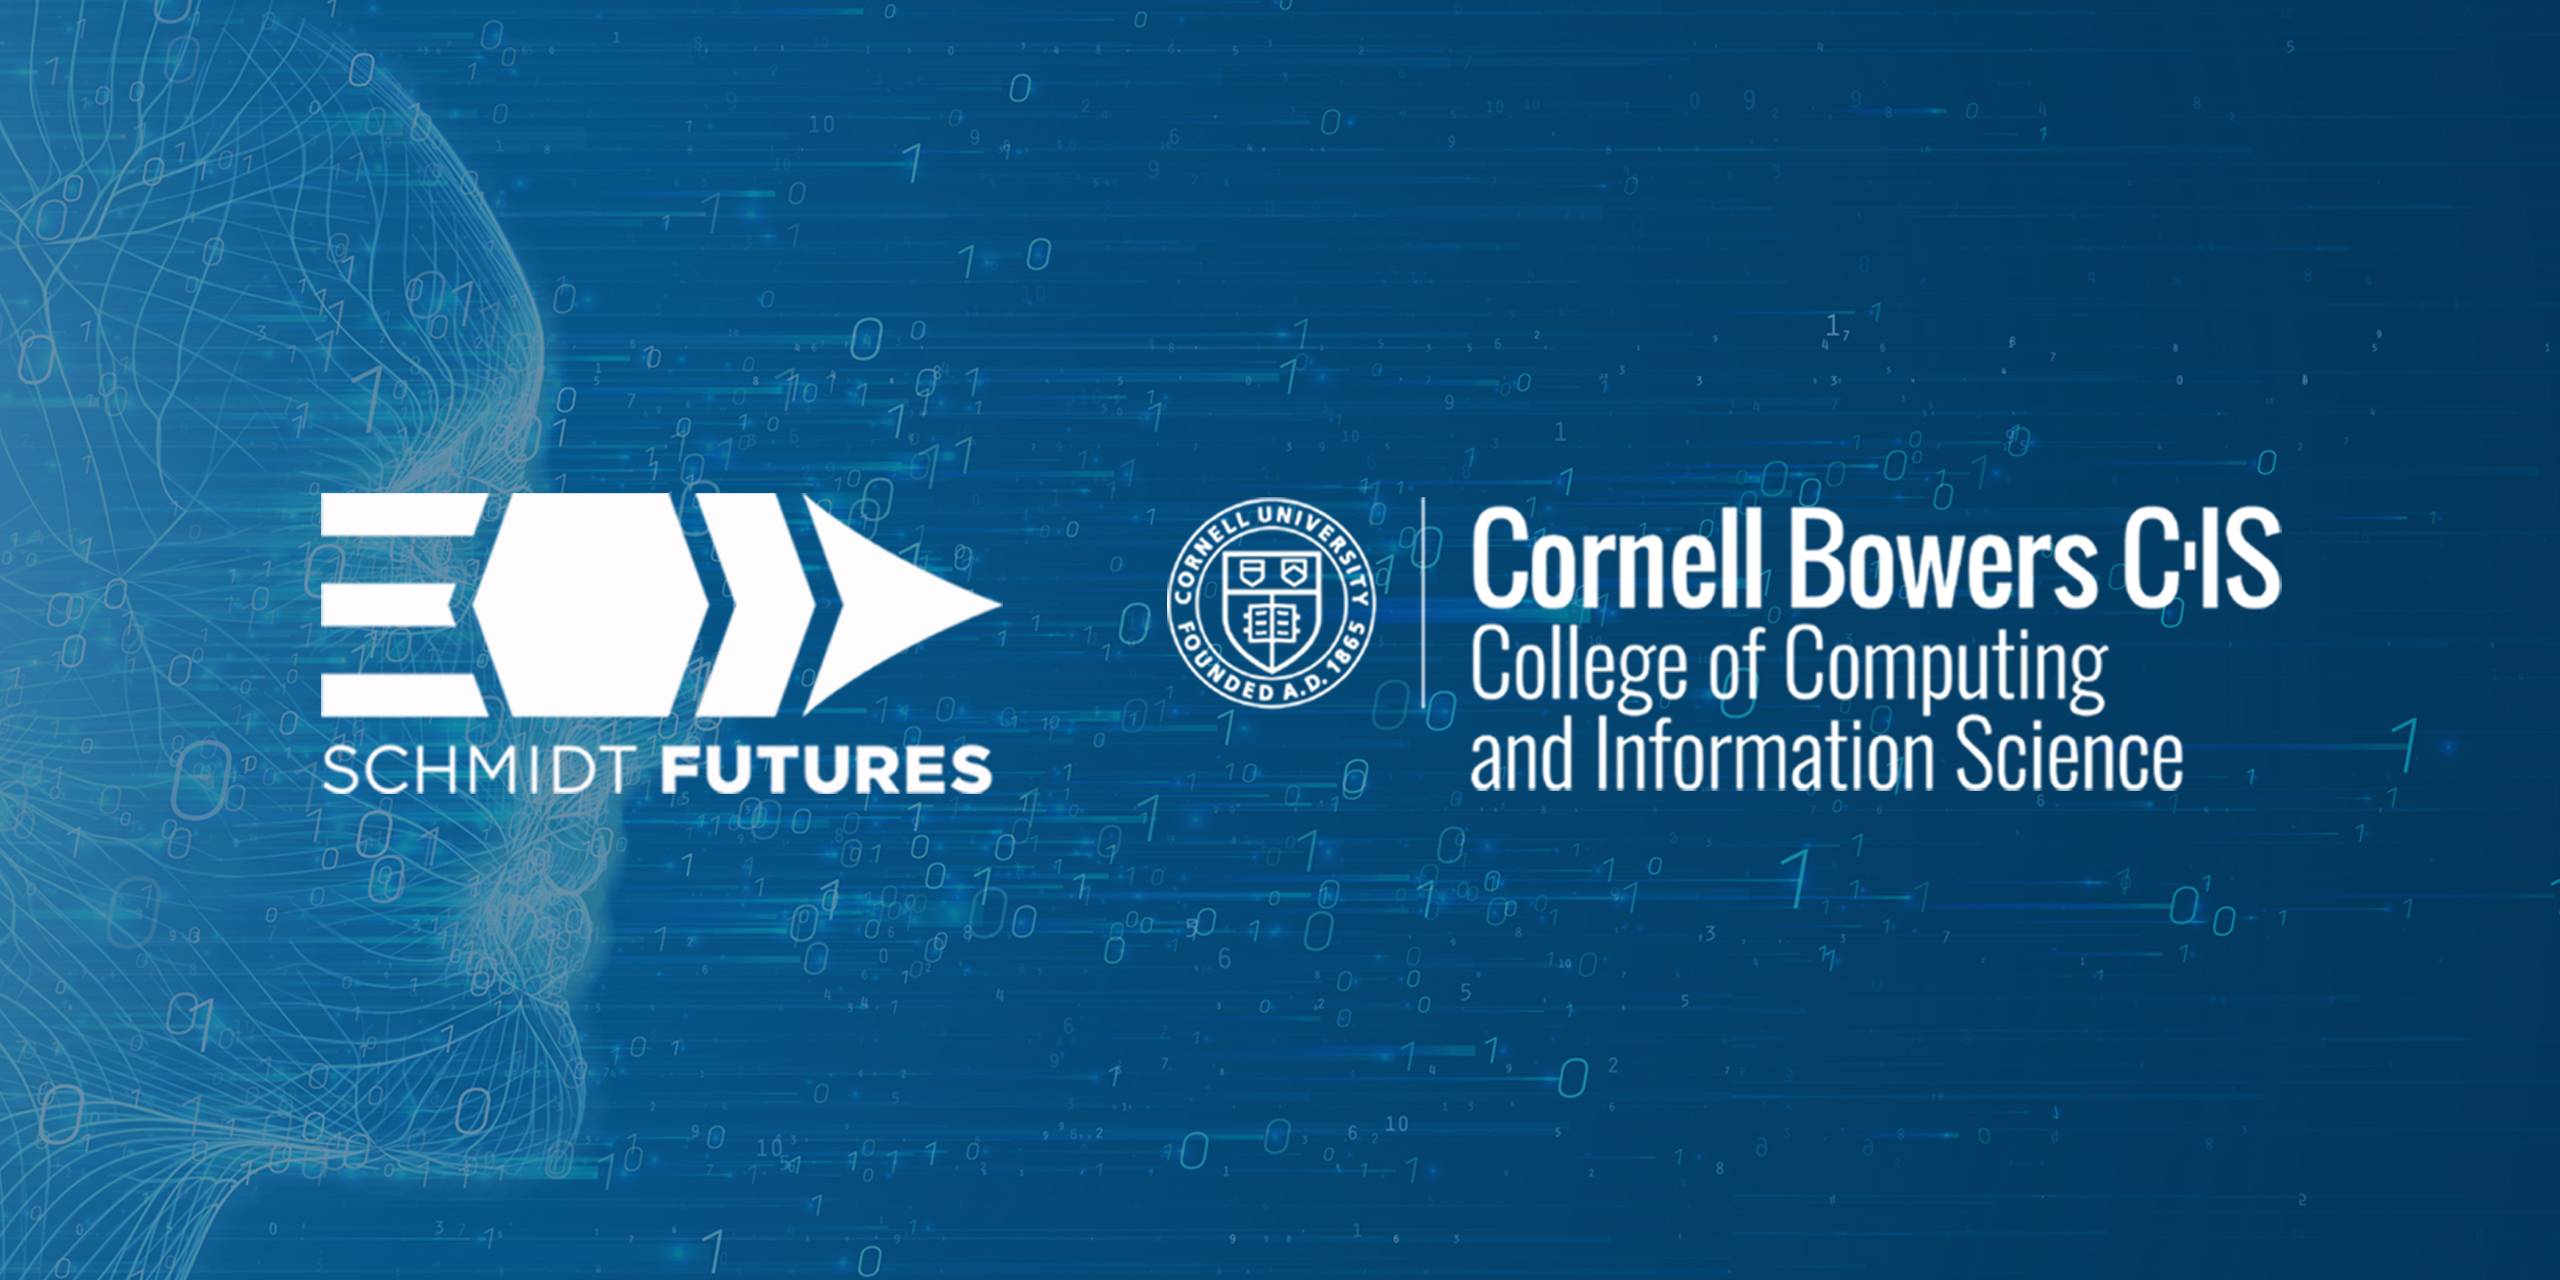 Graphic illustration with the text "Schmidt Futures" and "Cornell Bower CIS."